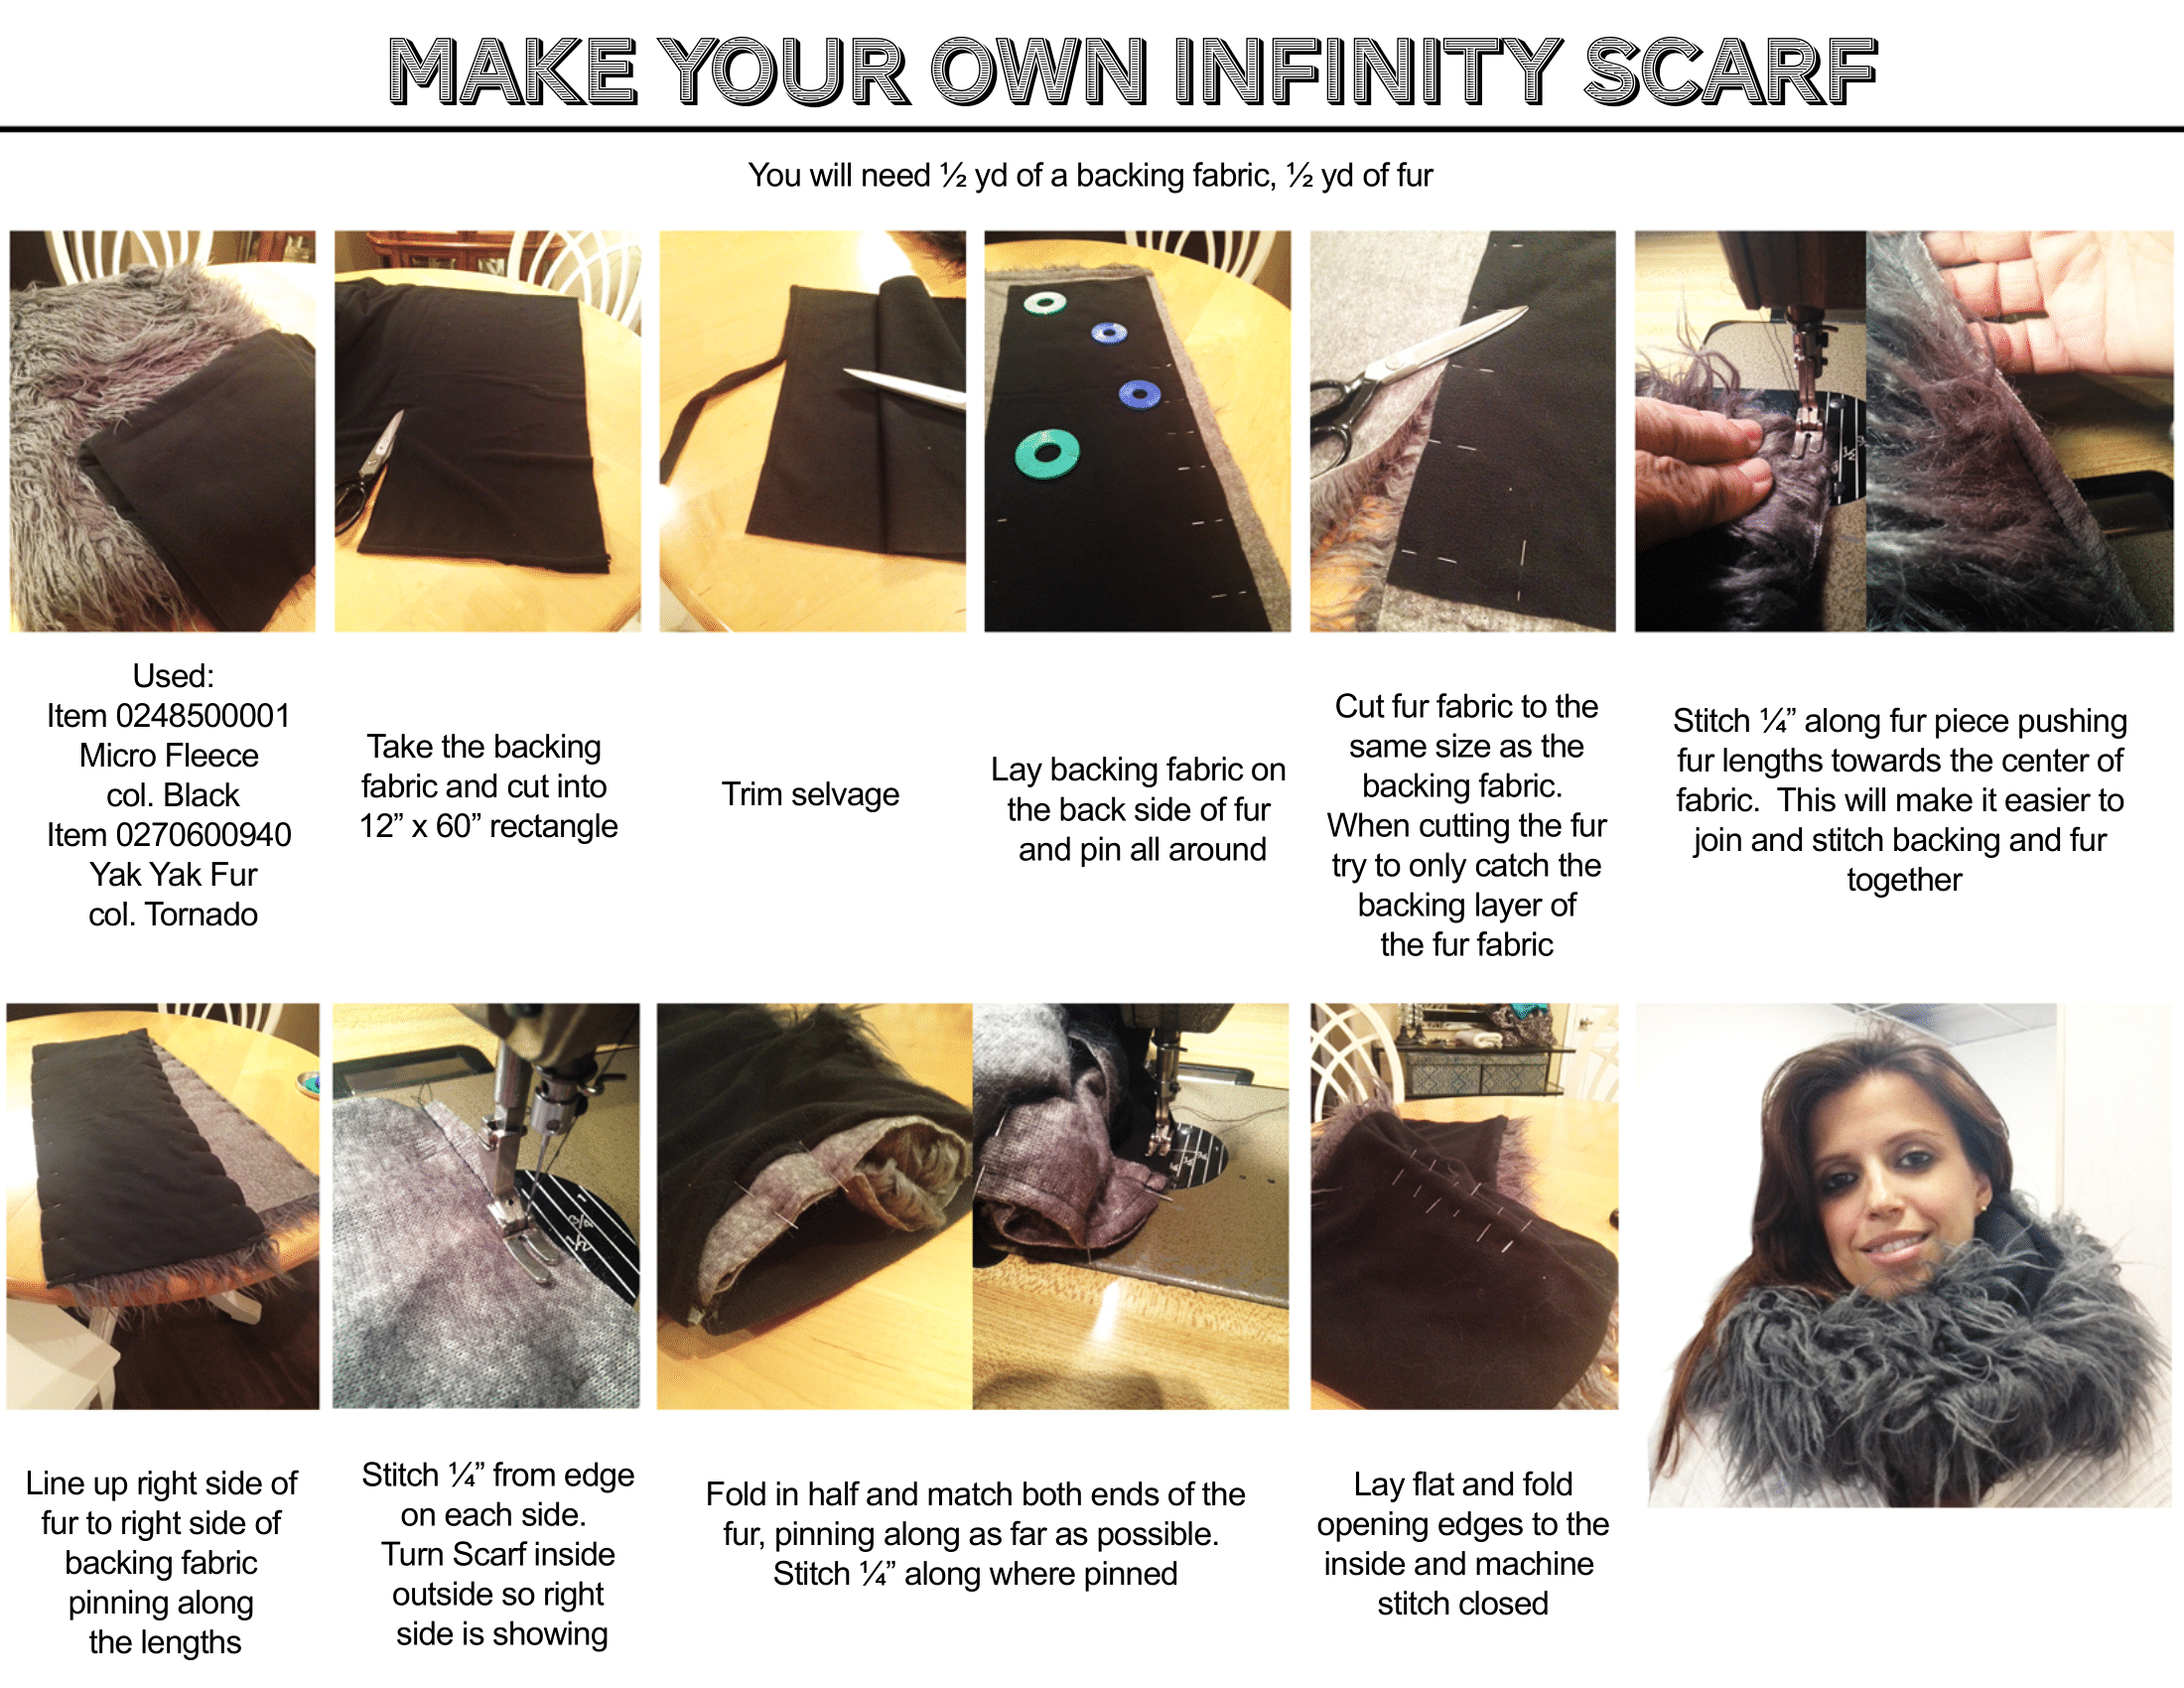 Steps to create your own infinity scarf